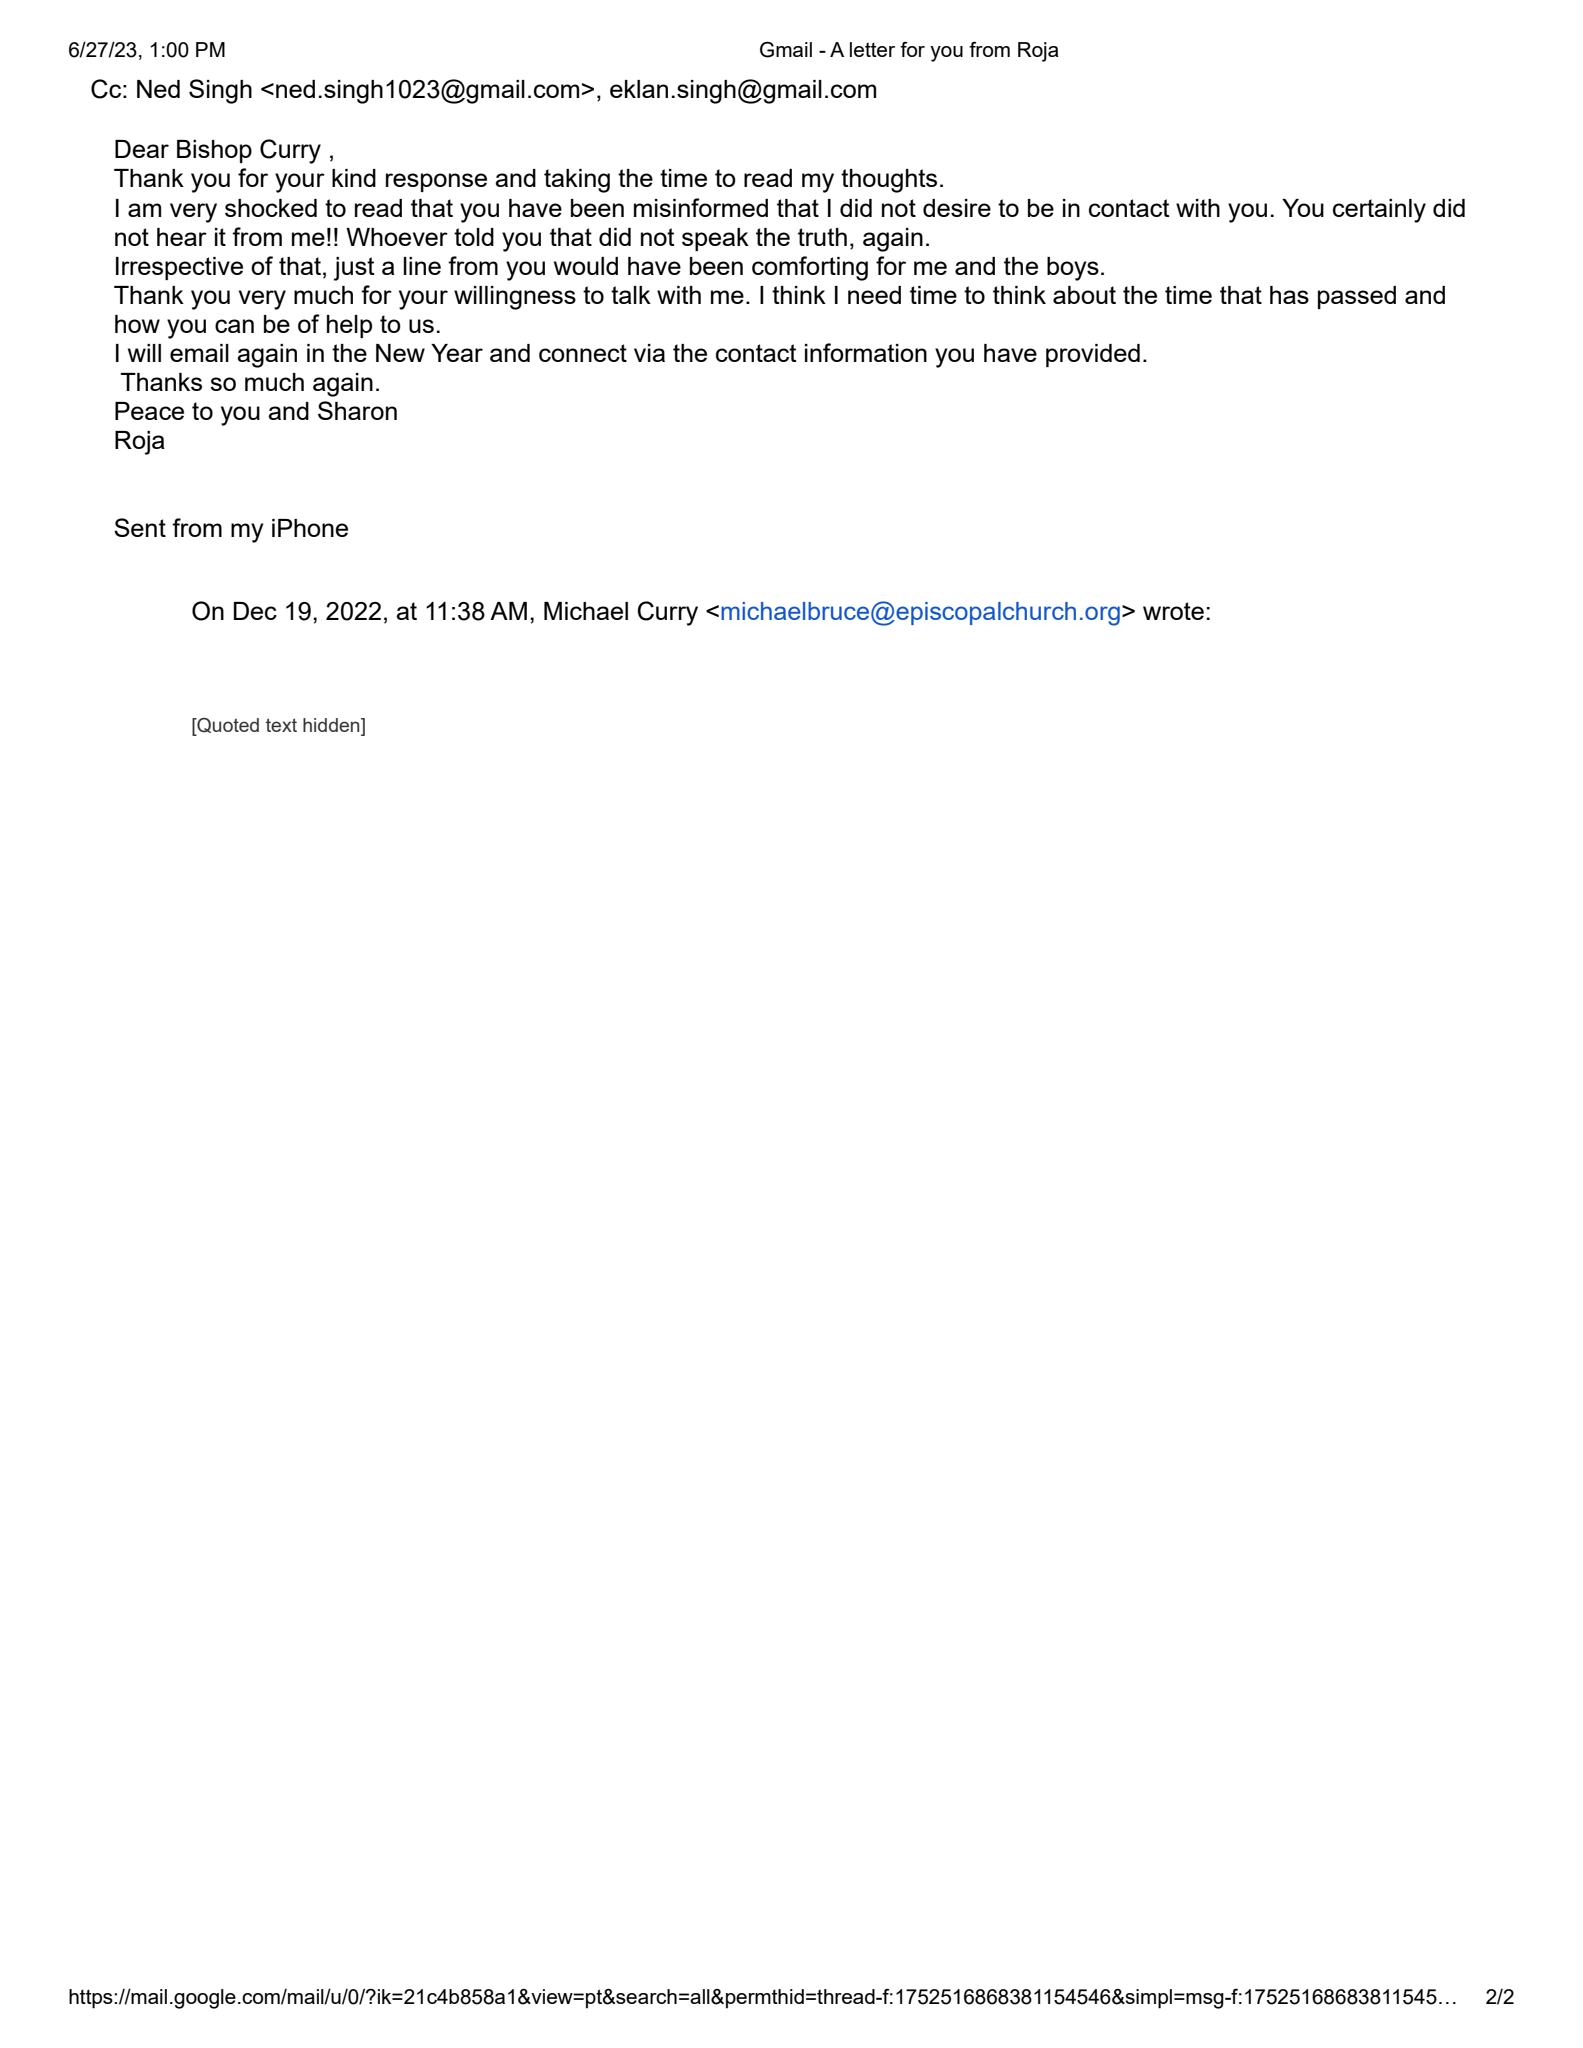 Email exchange - Page 2